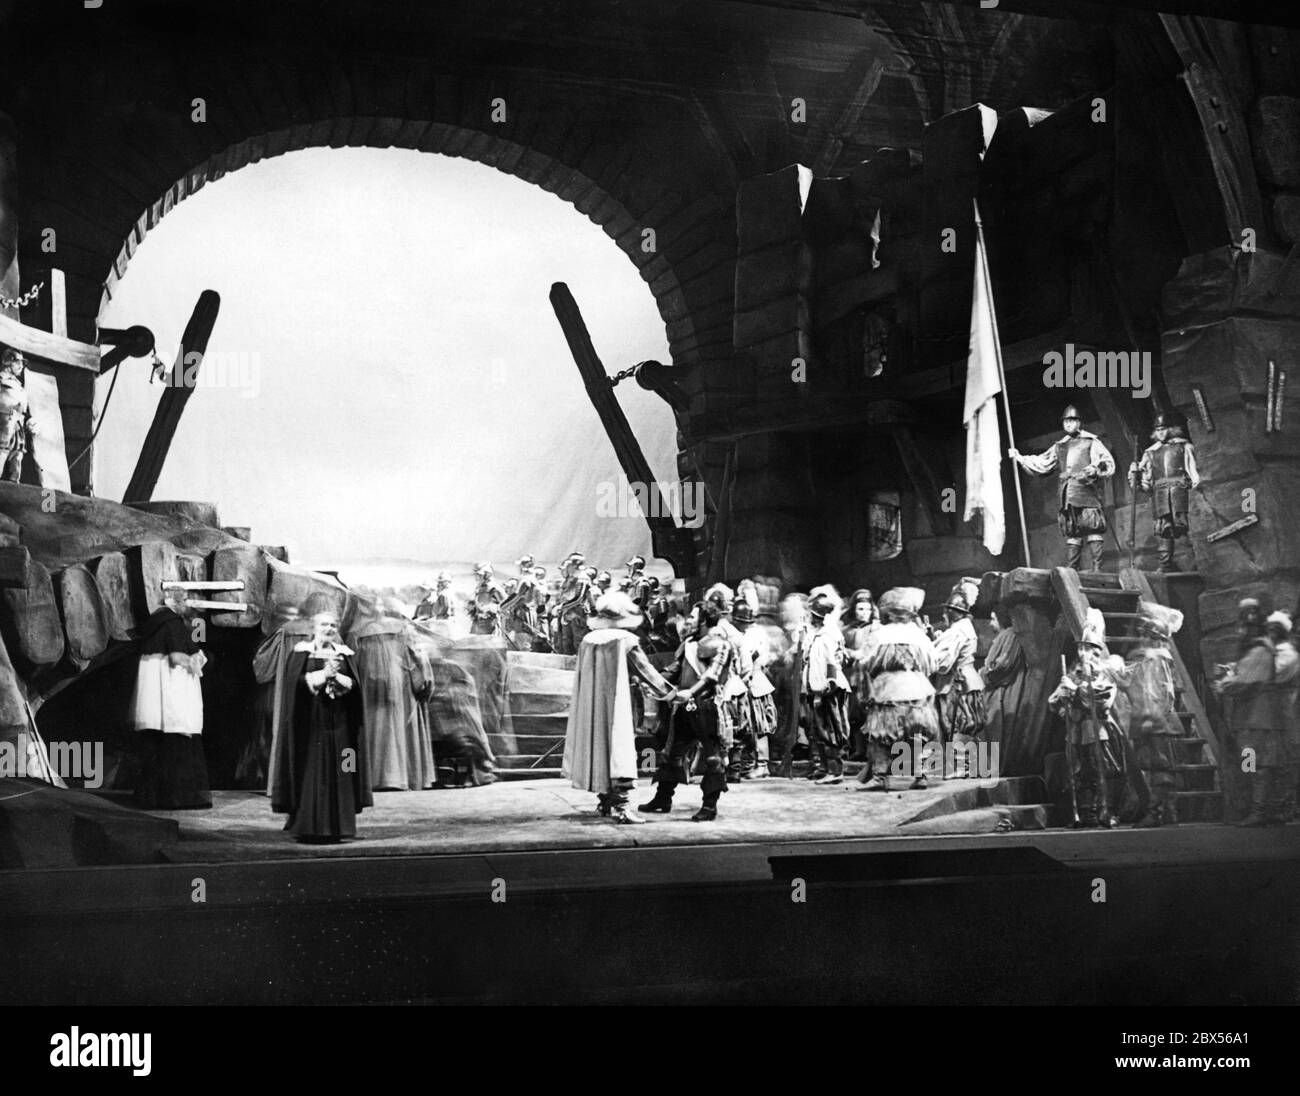 Closing photo of the opera 'Friedenstag' (Peace Day) by composer Richard Strauss at the Staatsoper 'Unter den Linden' in Berlin. Stock Photo